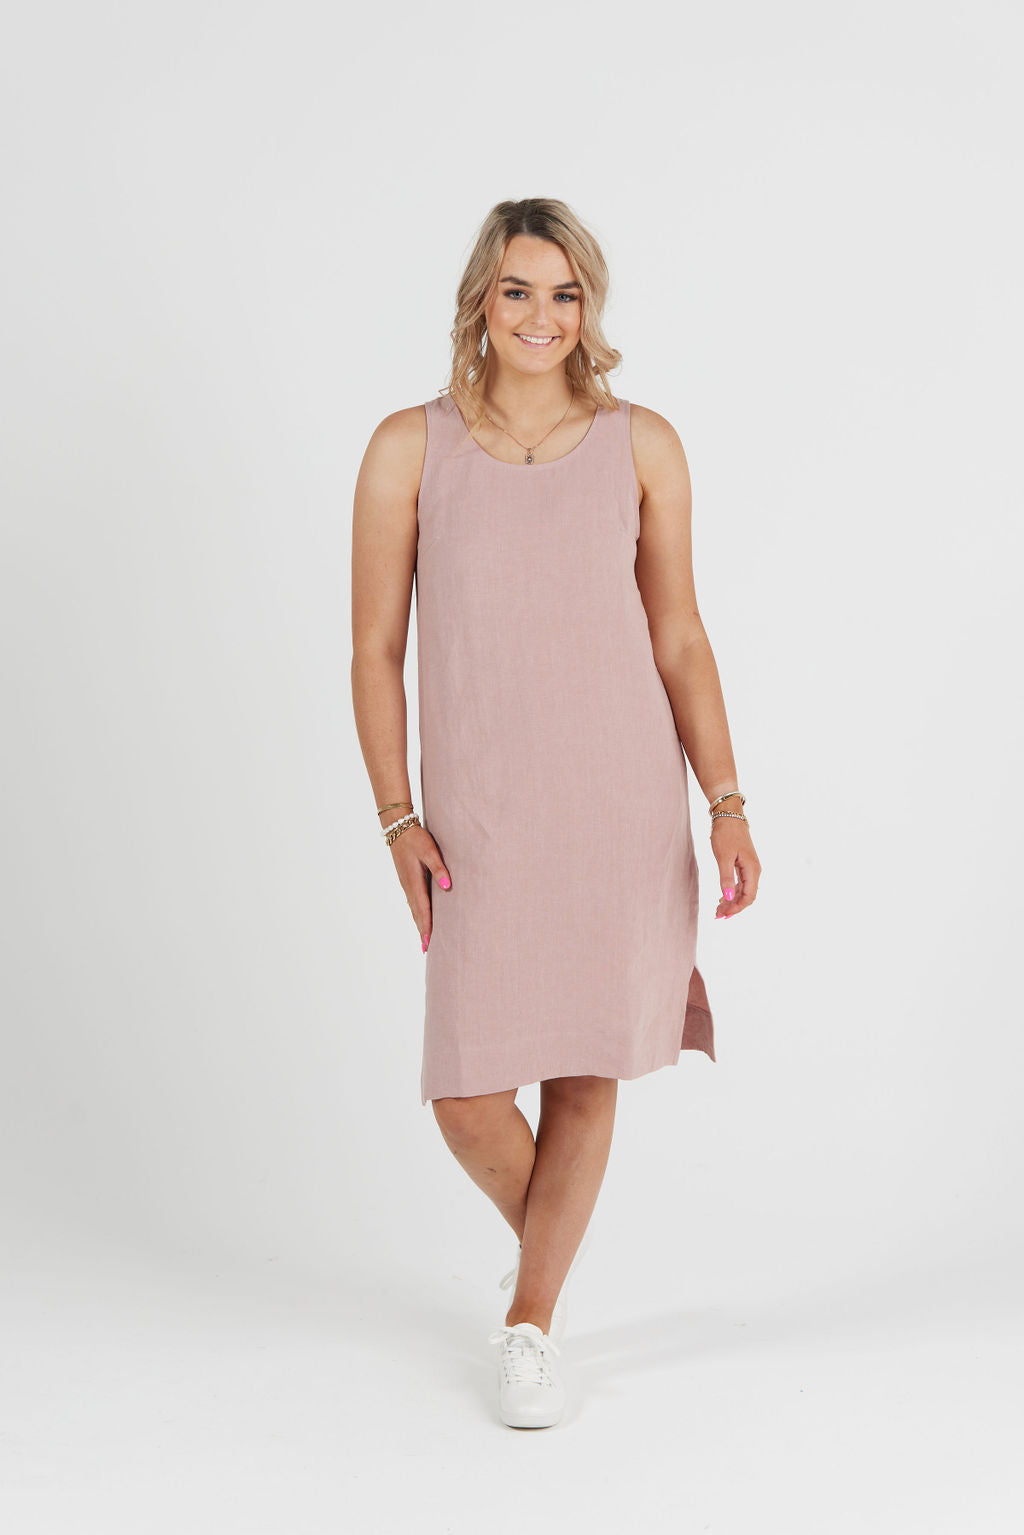 Pearl Slip Dress – Mint Boutique LTD - All Rights Reserved